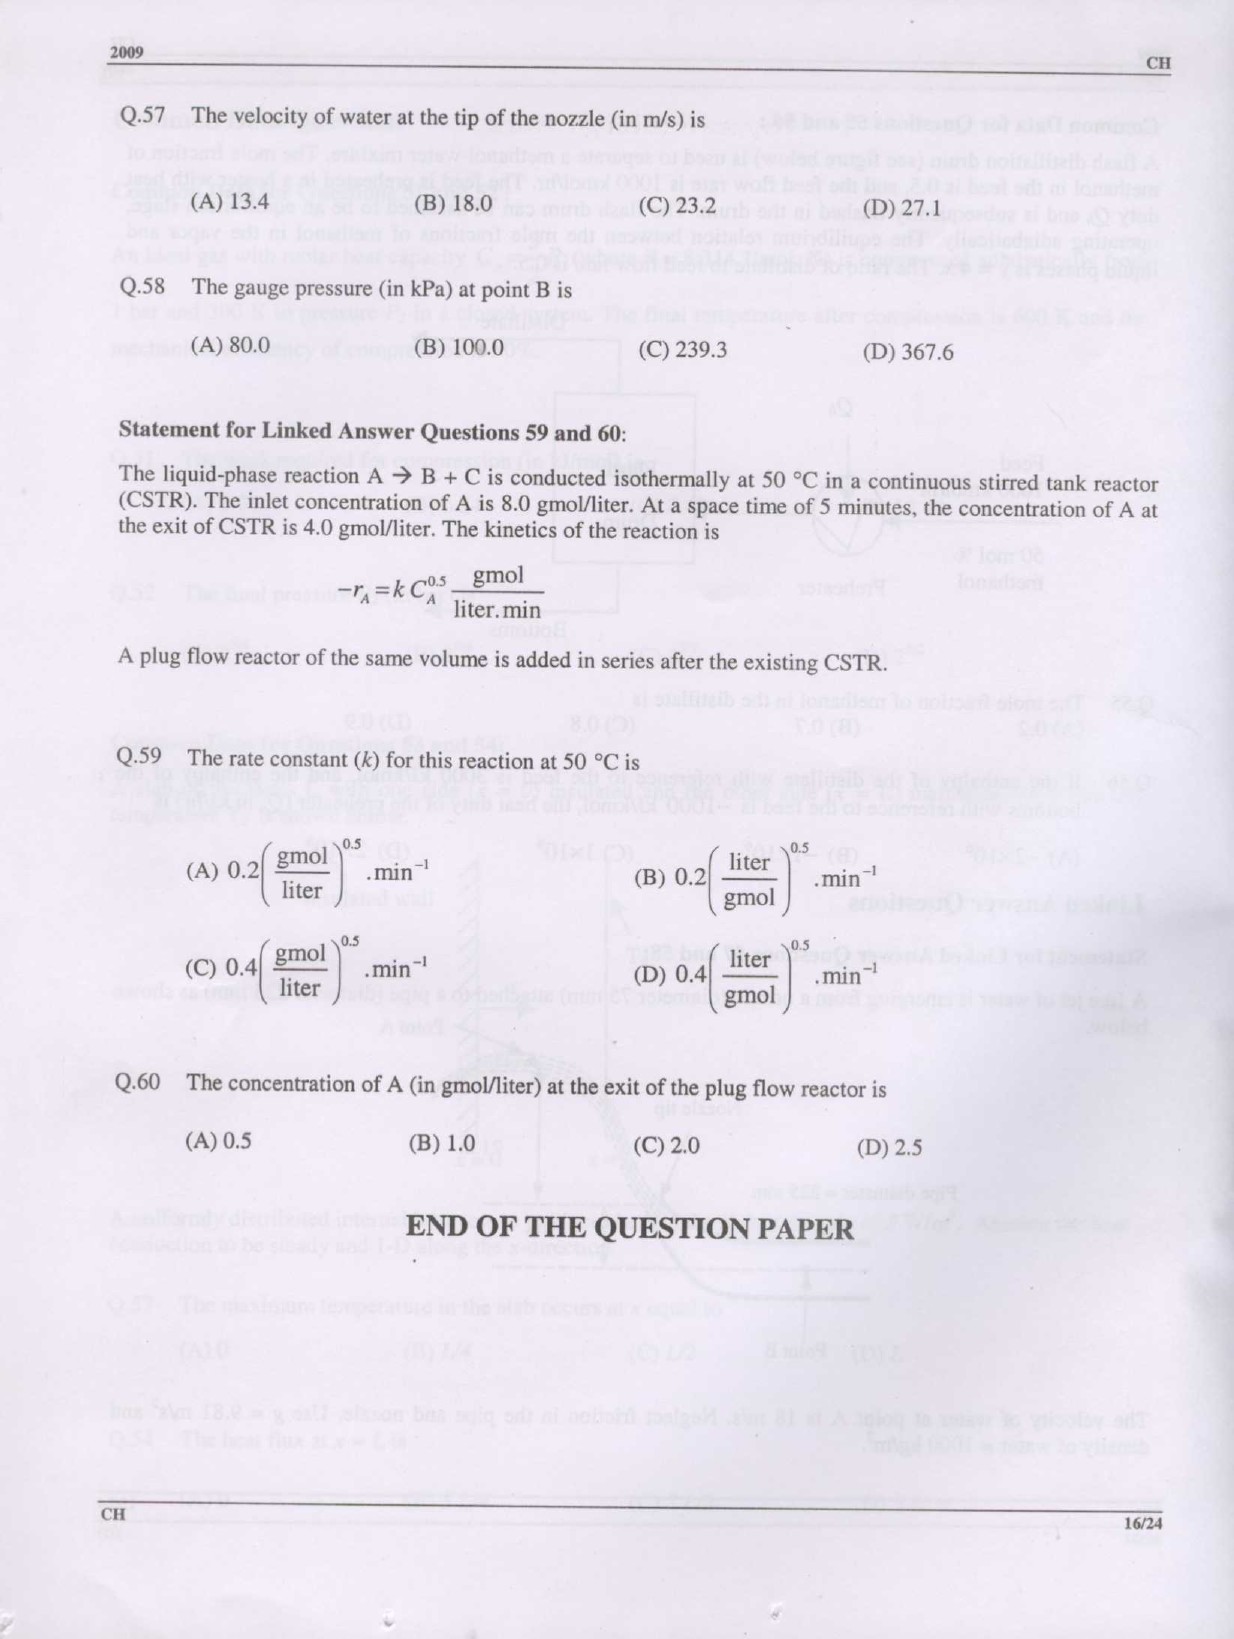 GATE Exam Question Paper 2009 Chemical Engineering 16